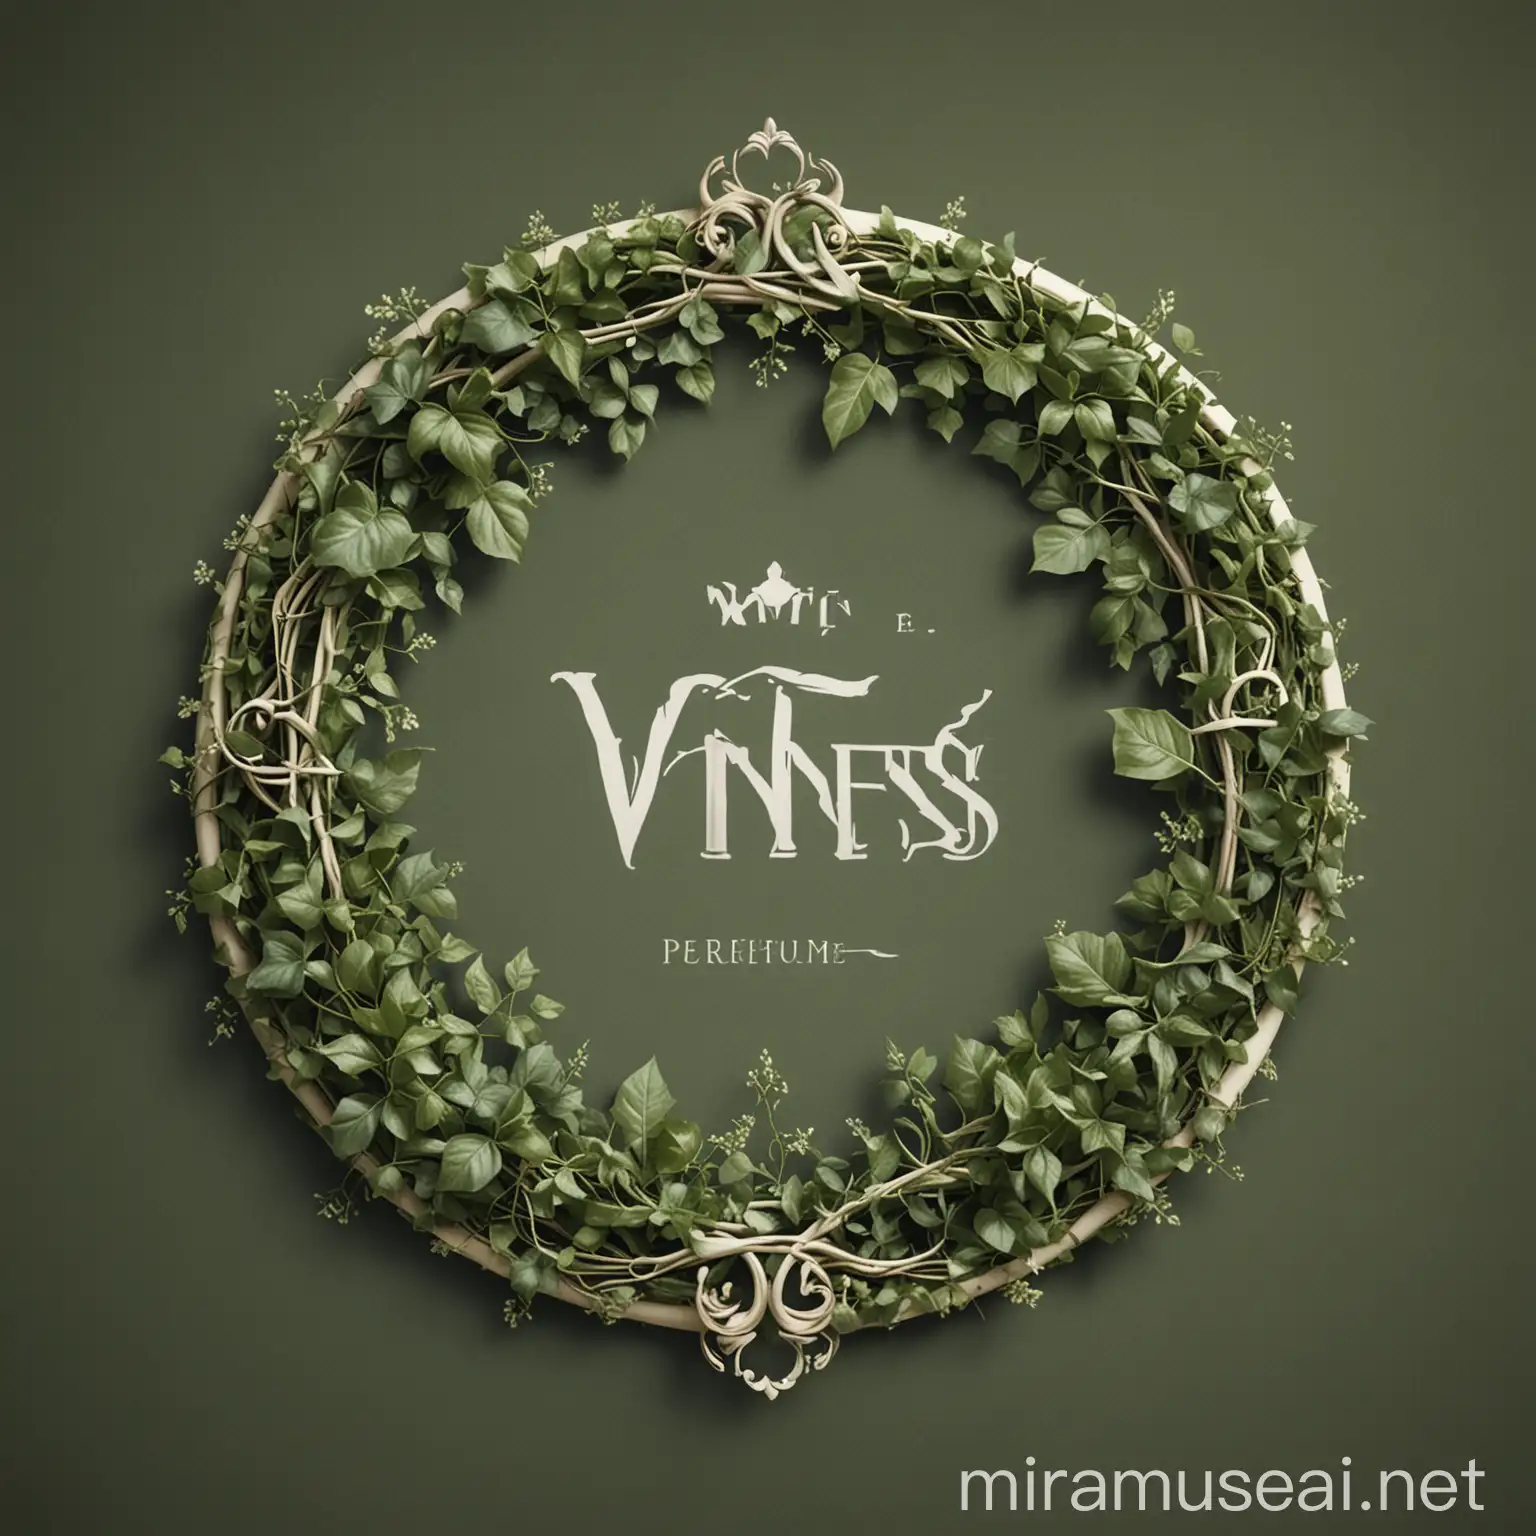 Crown and Ivy Vines Logo Design with Perfume Bottle